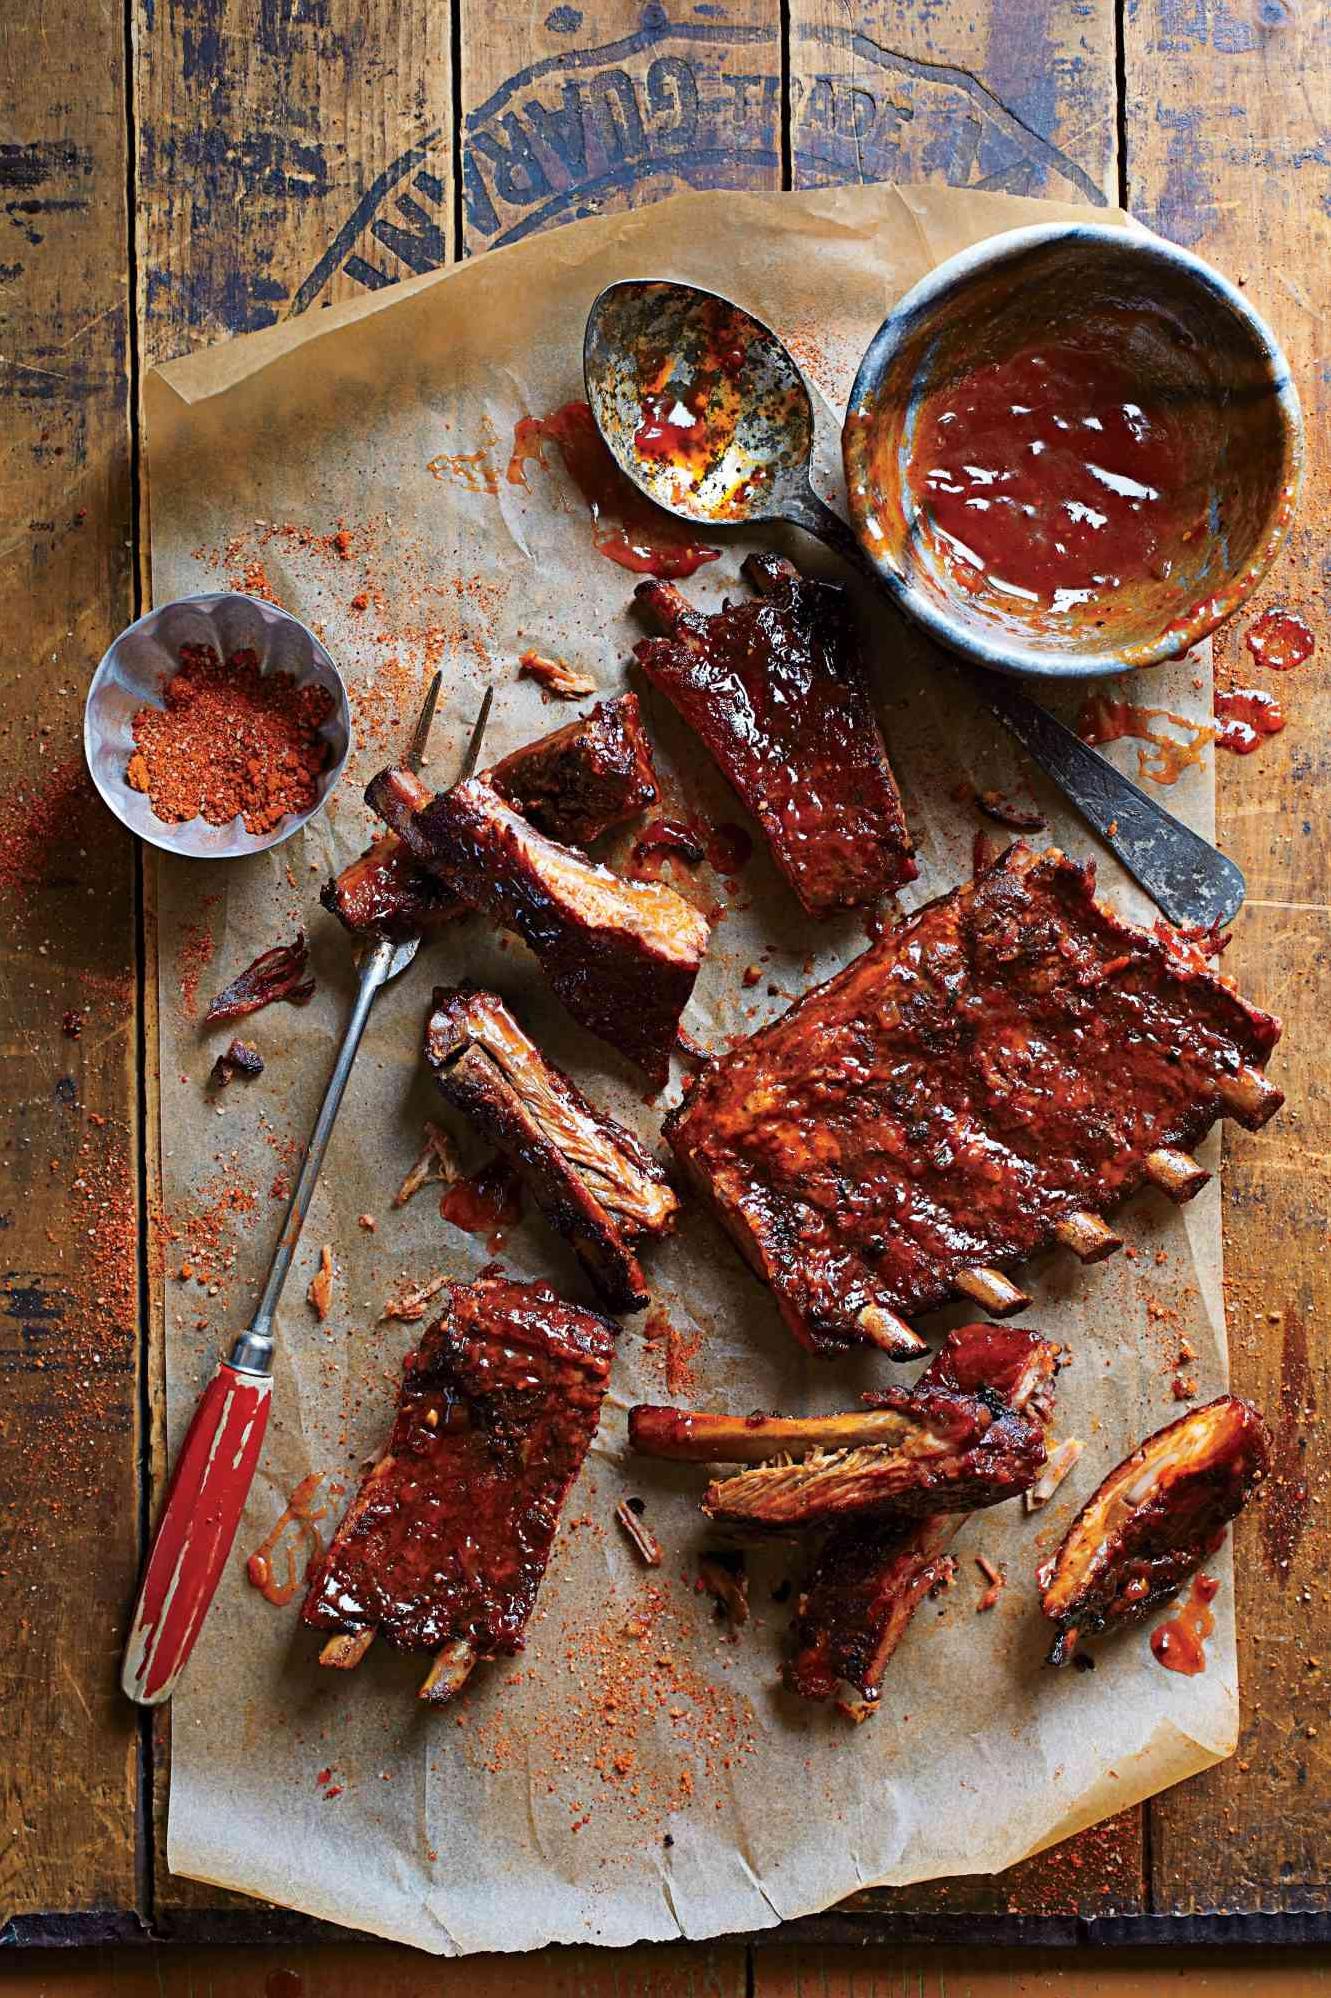  Whether it’s burgers, chicken or ribs, this BBQ sauce is the perfect companion.